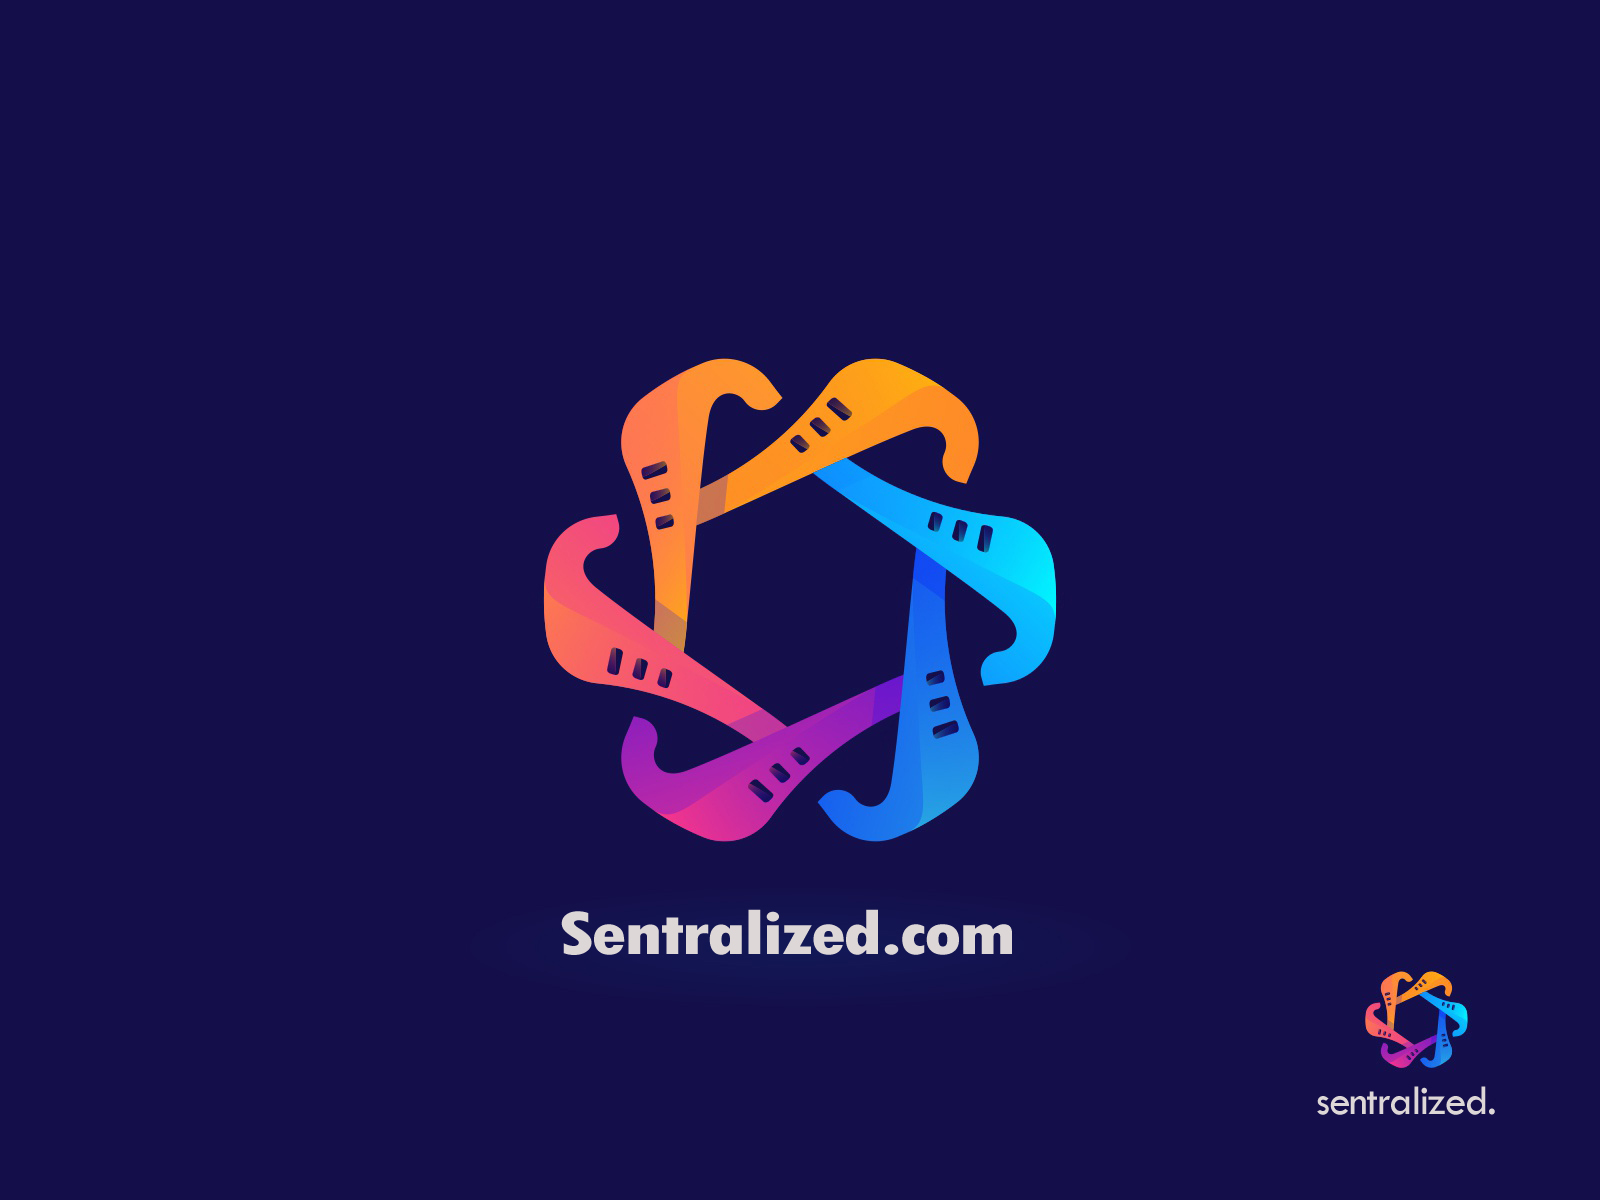 centralized_sentralized_blockchain_crypto_currency.jpg